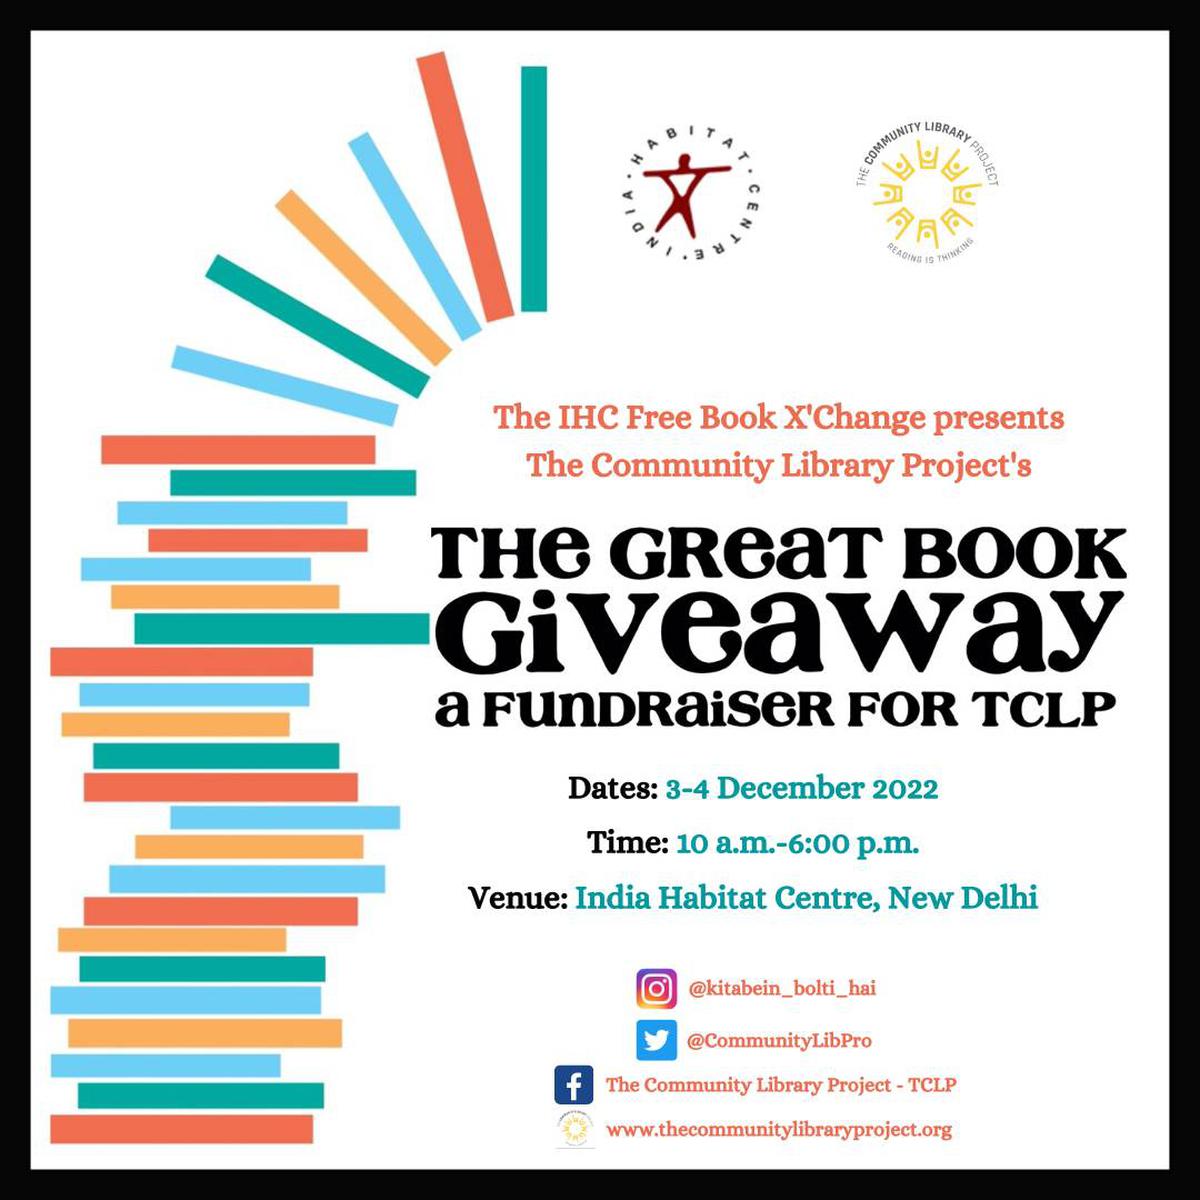 New Delhi | Book giveaway, art workshops, rap performances and more by The Community Library Project this weekend